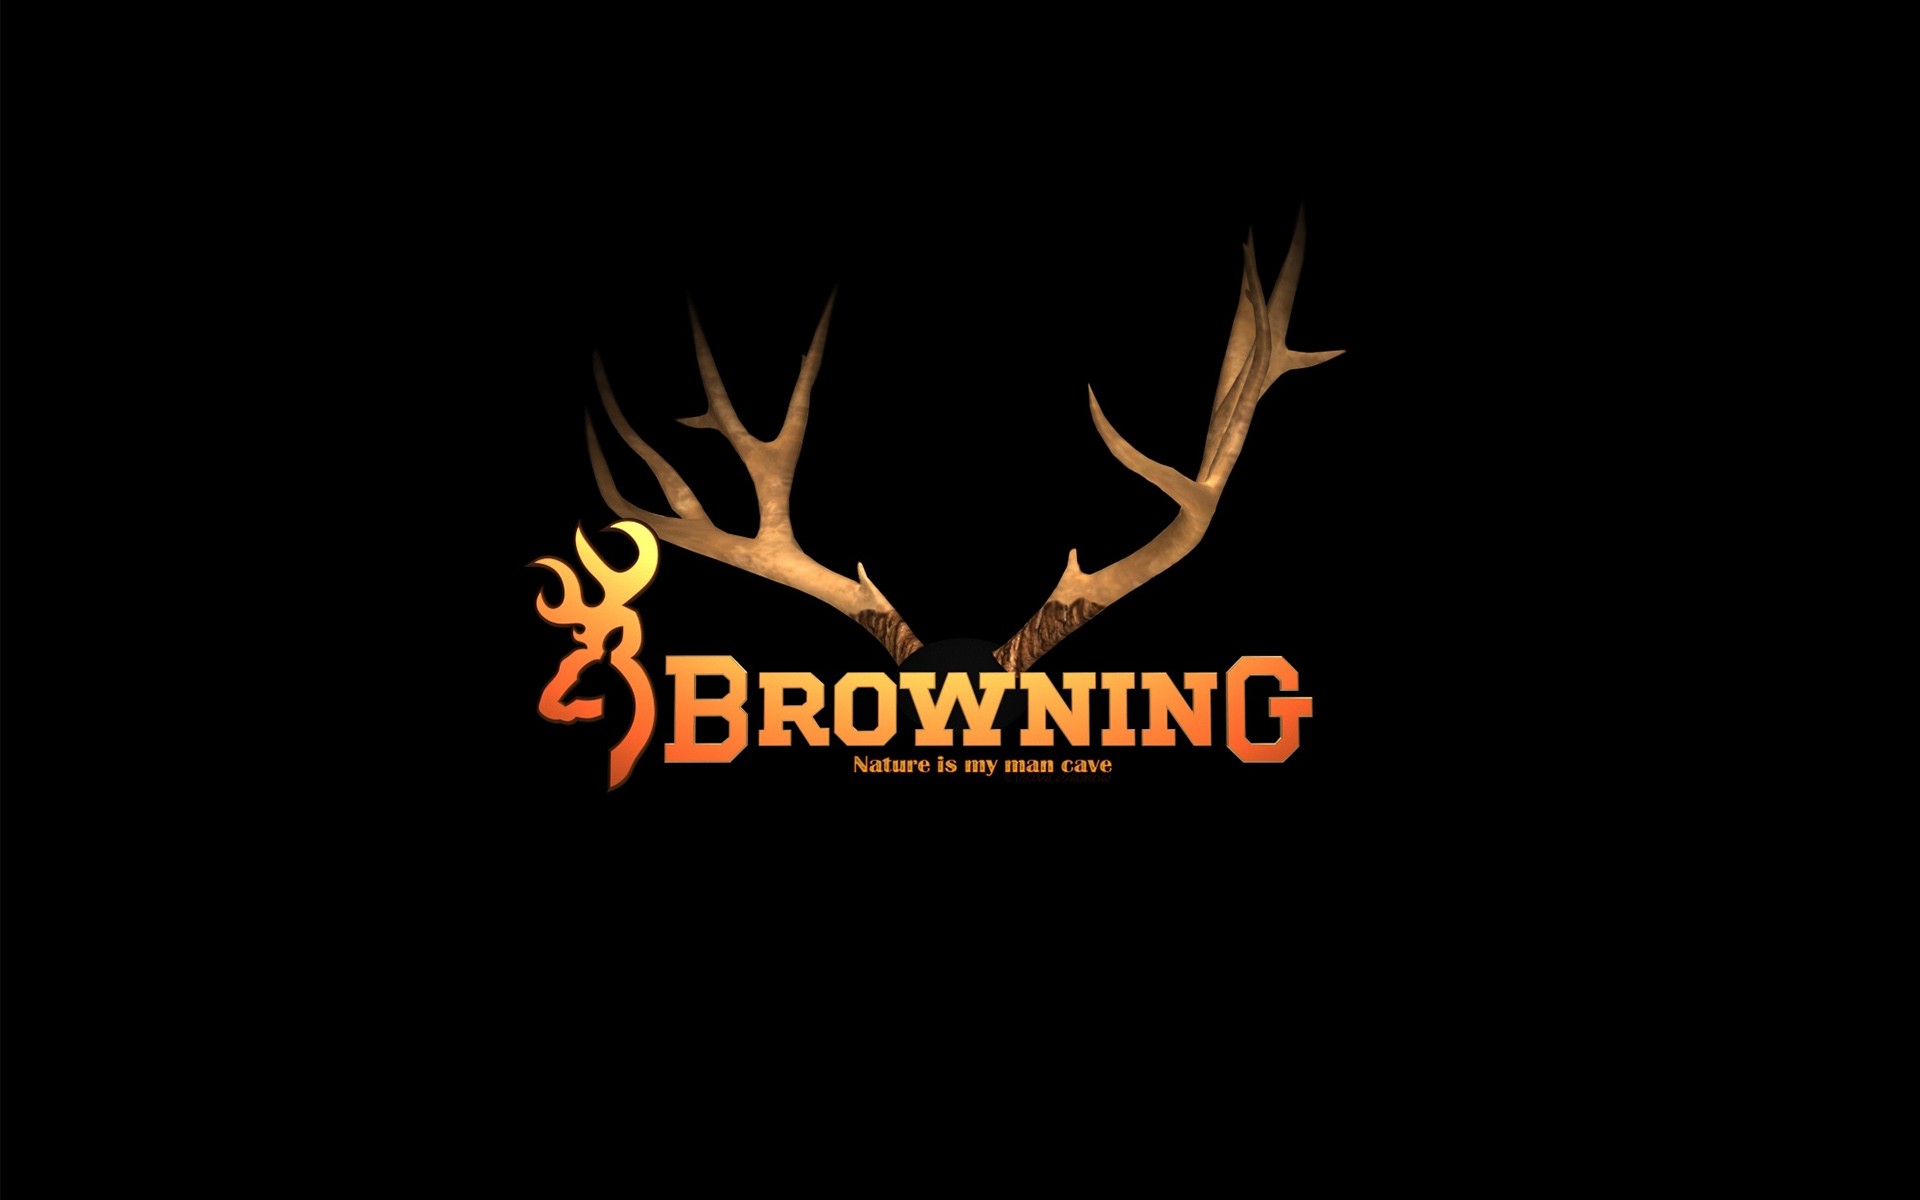 Browning Signs Wallpapers.